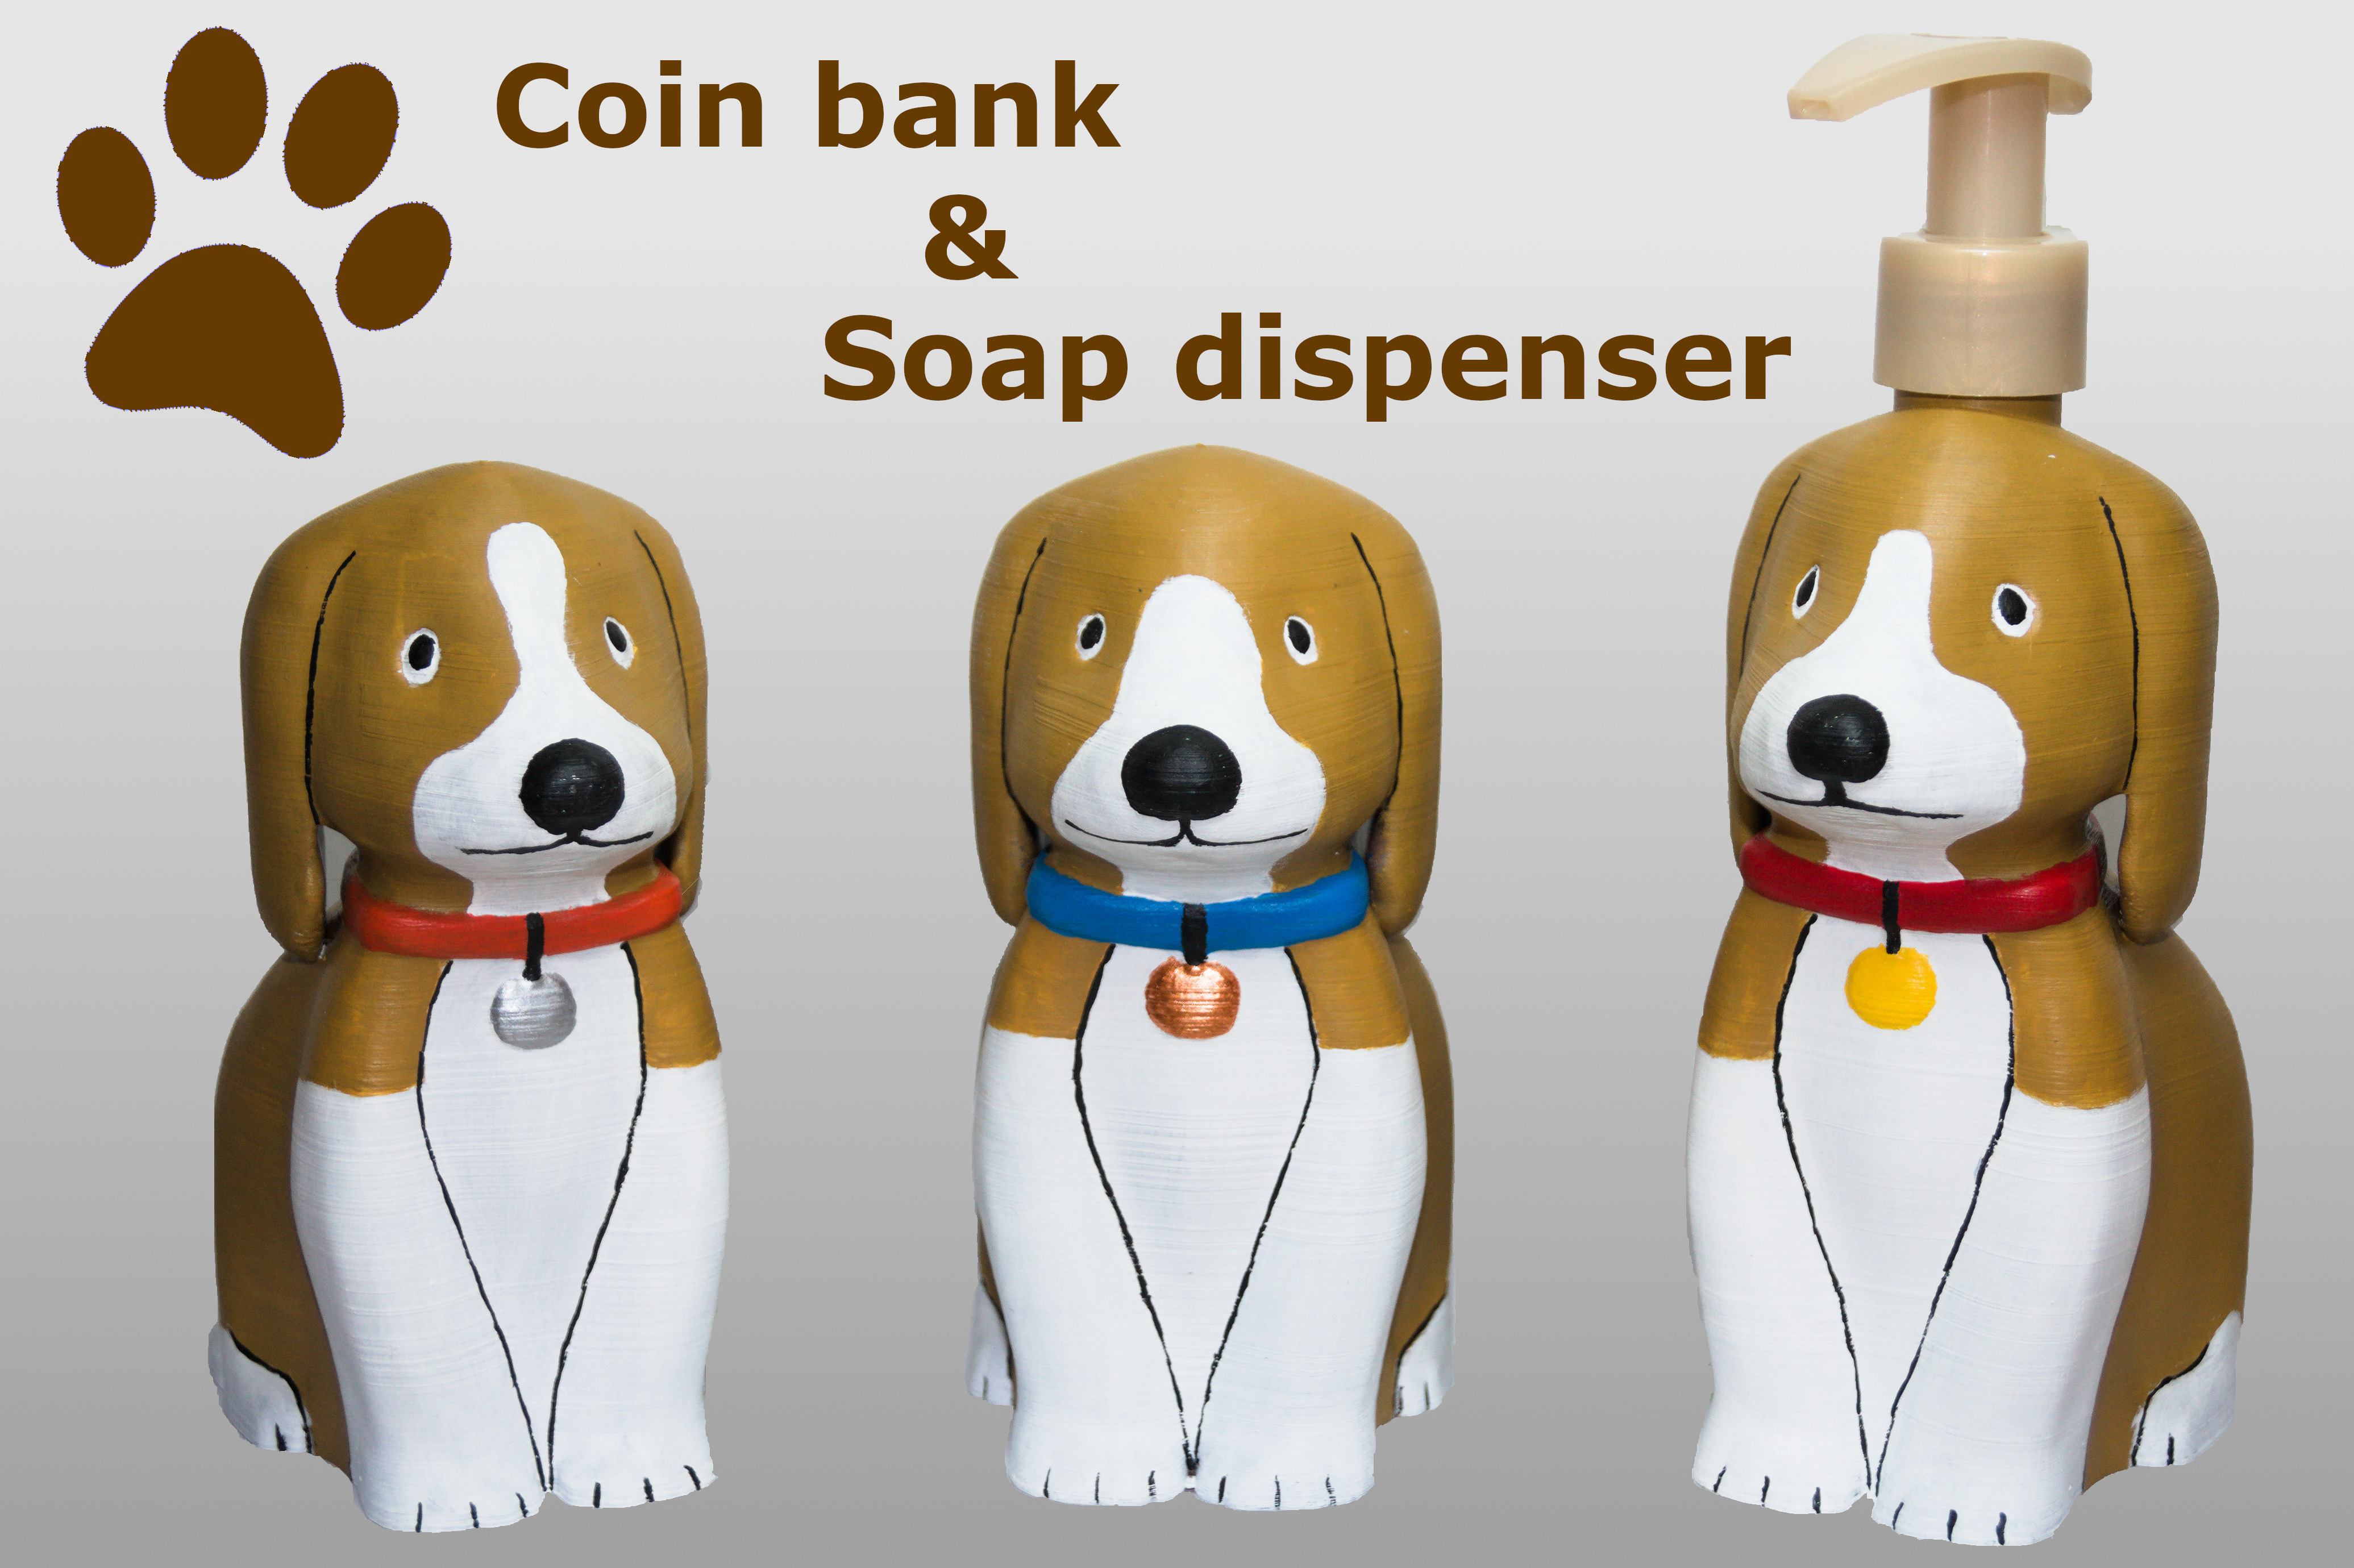 Dog shaped coin bank and soap dispenser